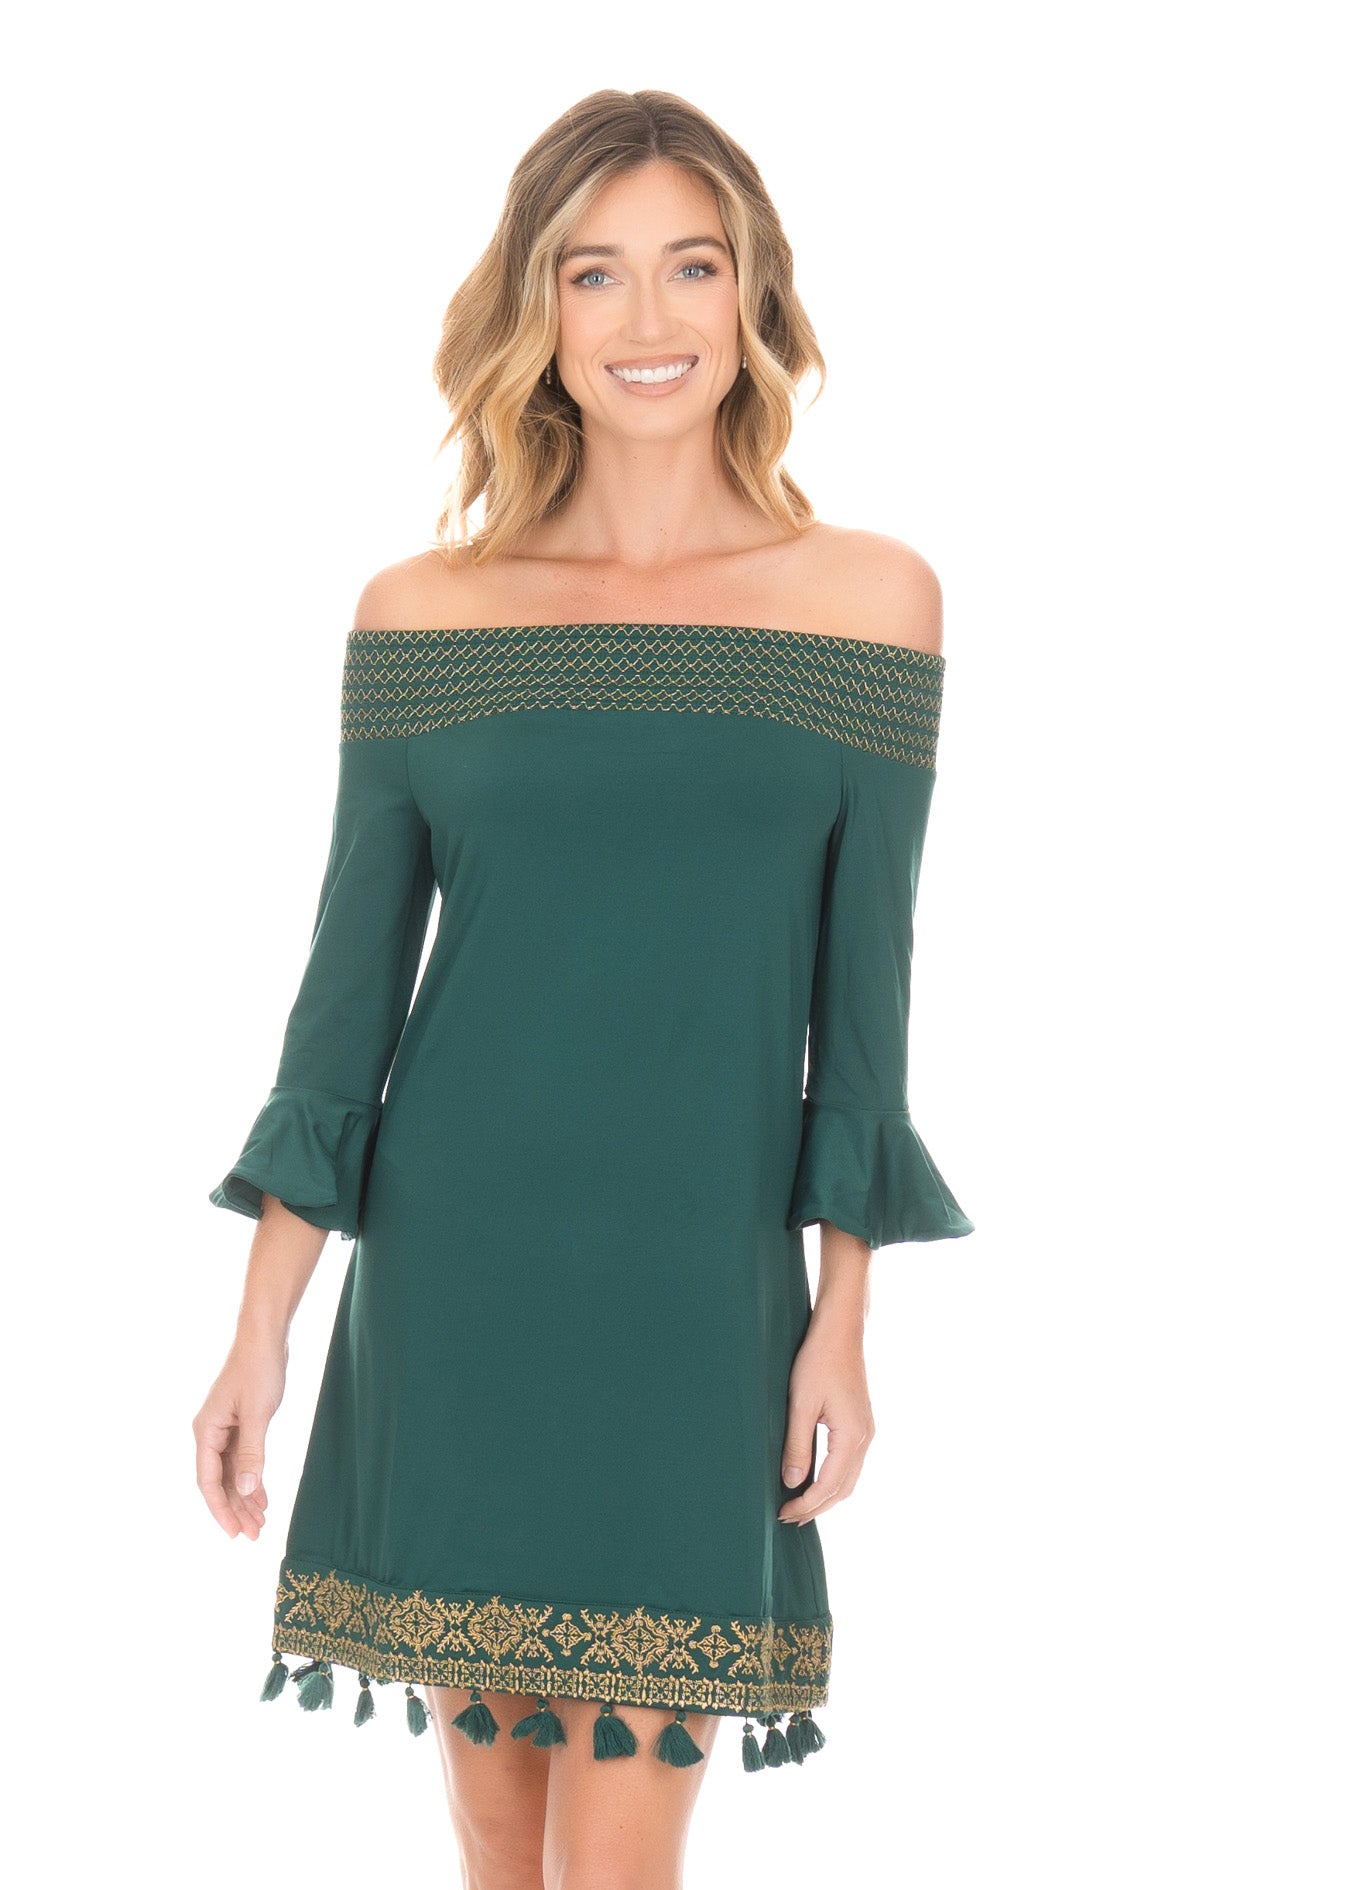 Front facing blonde woman wearing the Emerald Metallic Embroidered Off The Shoulder Dress while smiling.